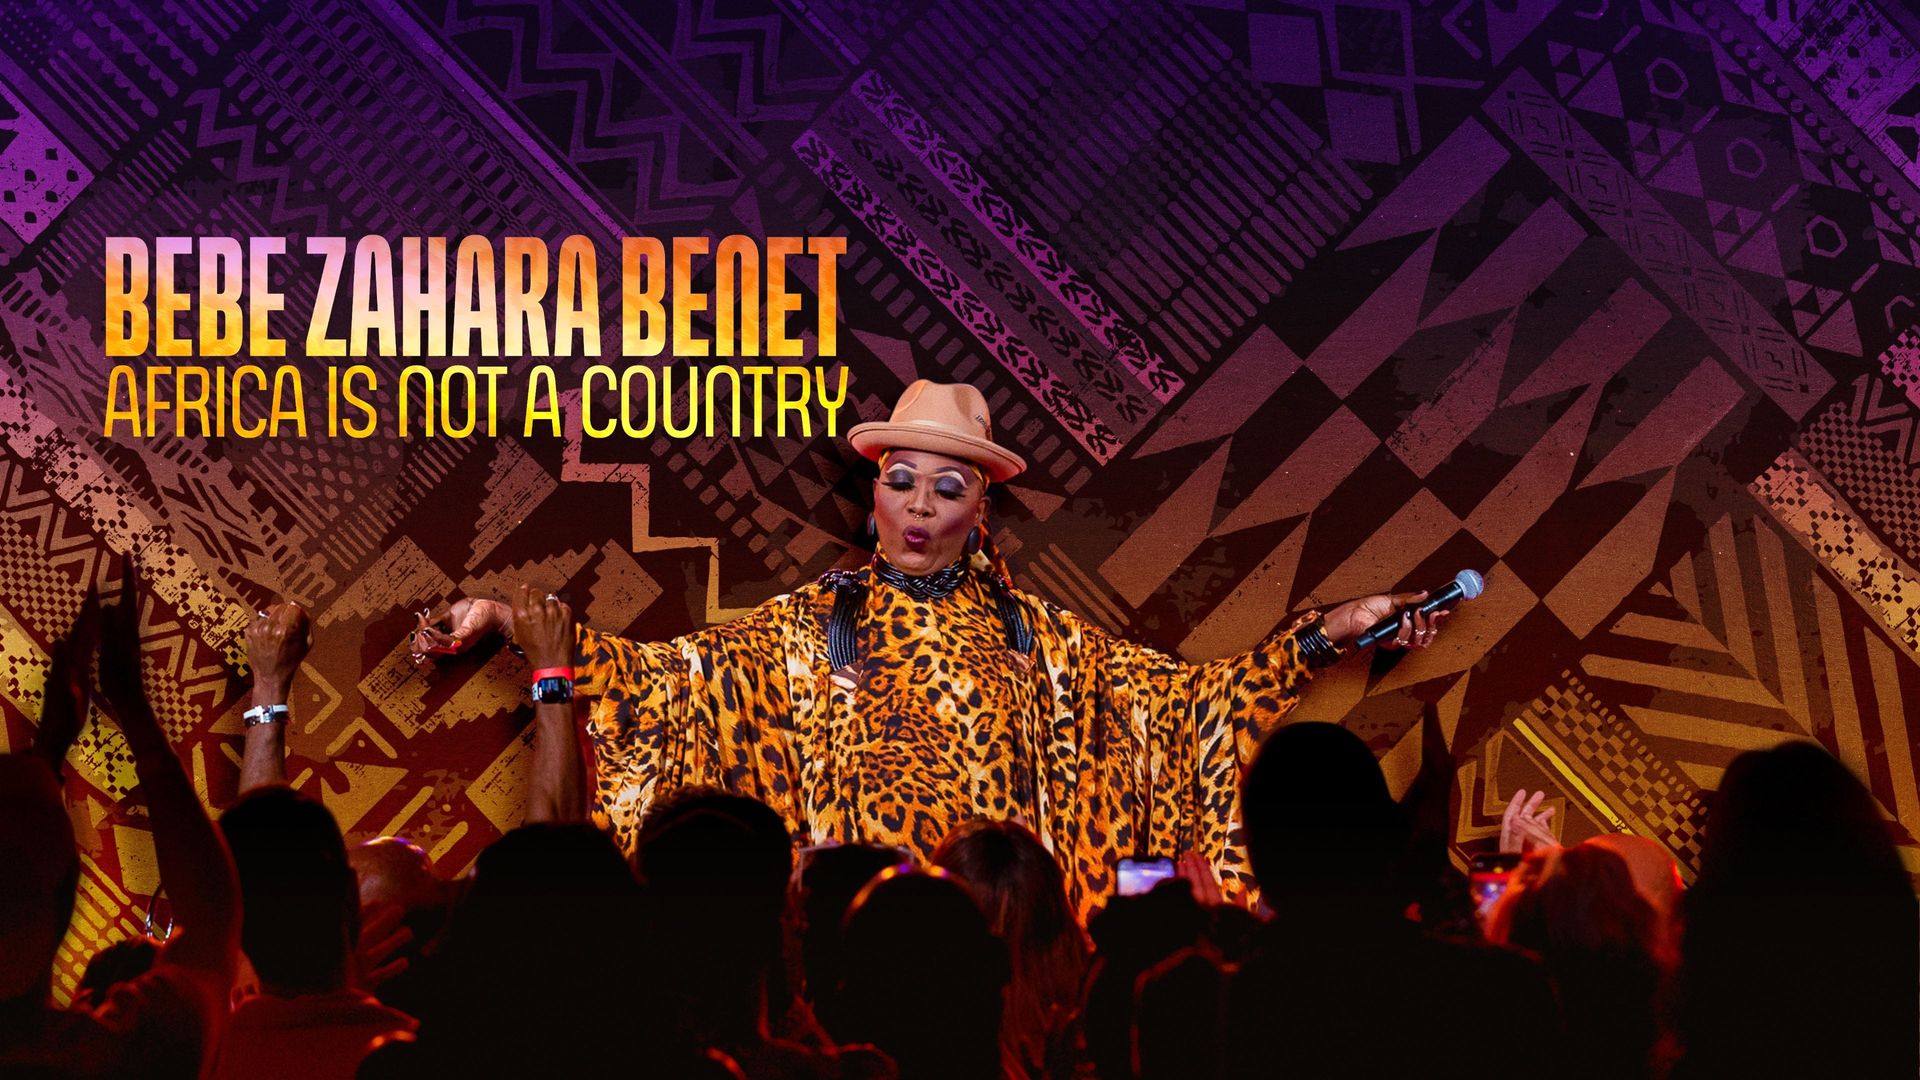 Bebe Zahara Benet: Africa Is Not a Country background